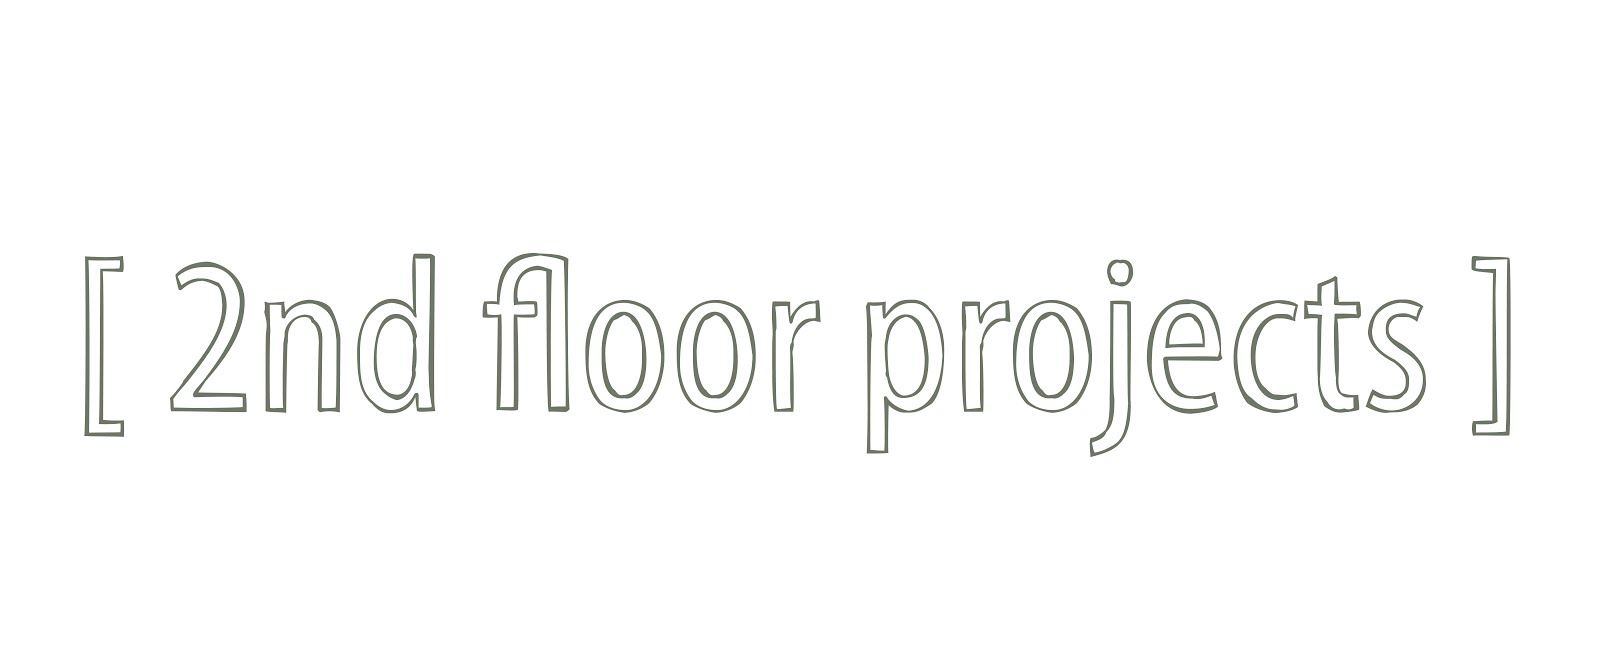 [ 2nd floor projects ]